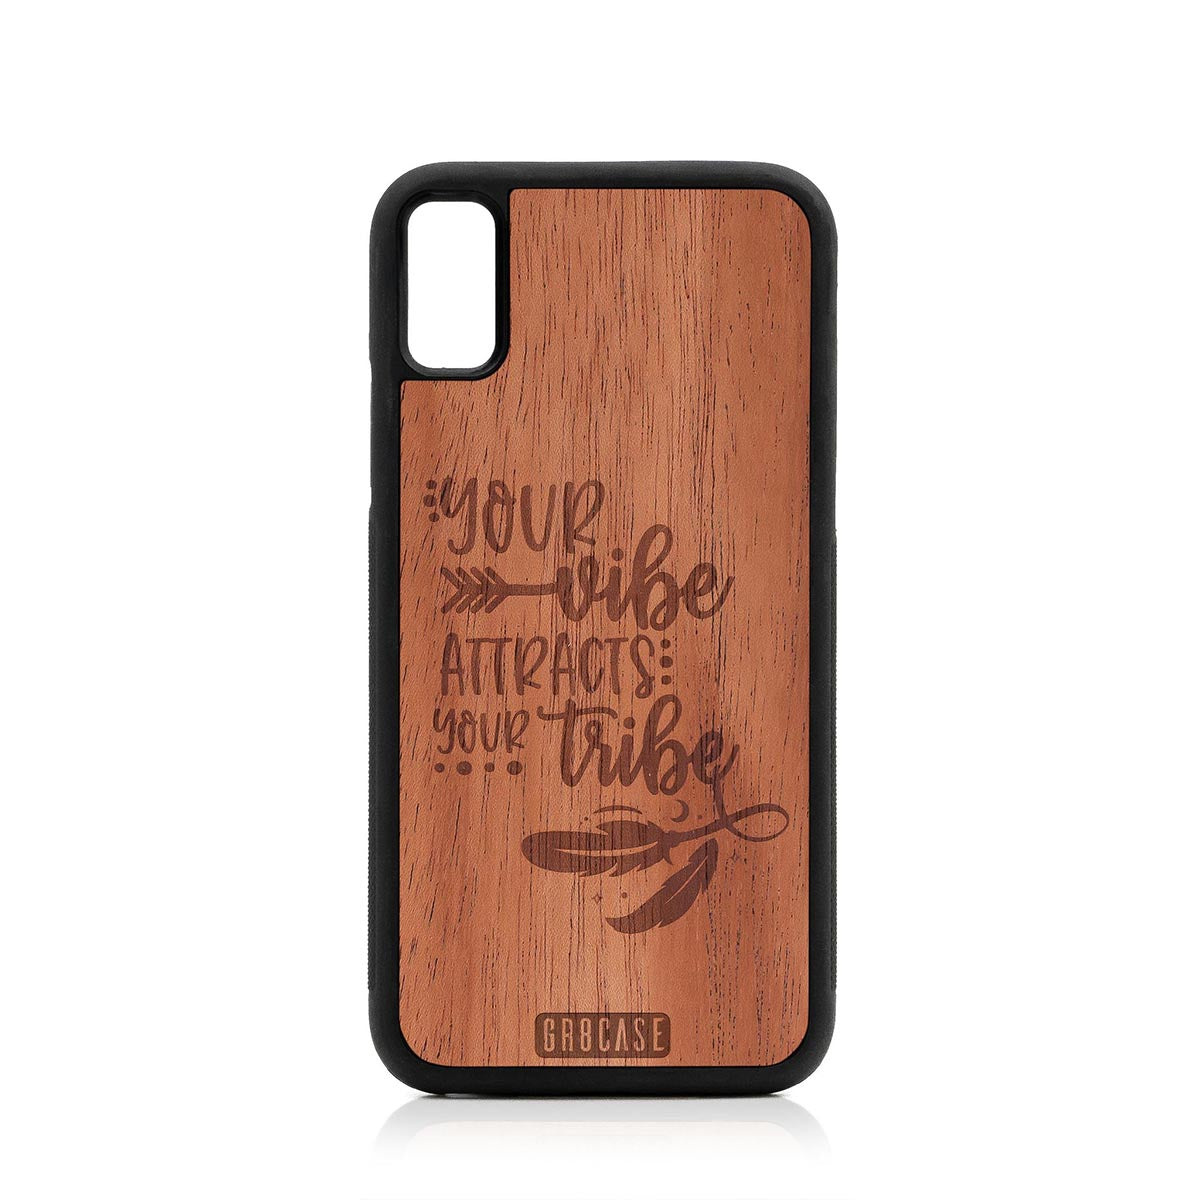 Your Vibe Attracts Your Tribe Design Wood Case For iPhone X/XS